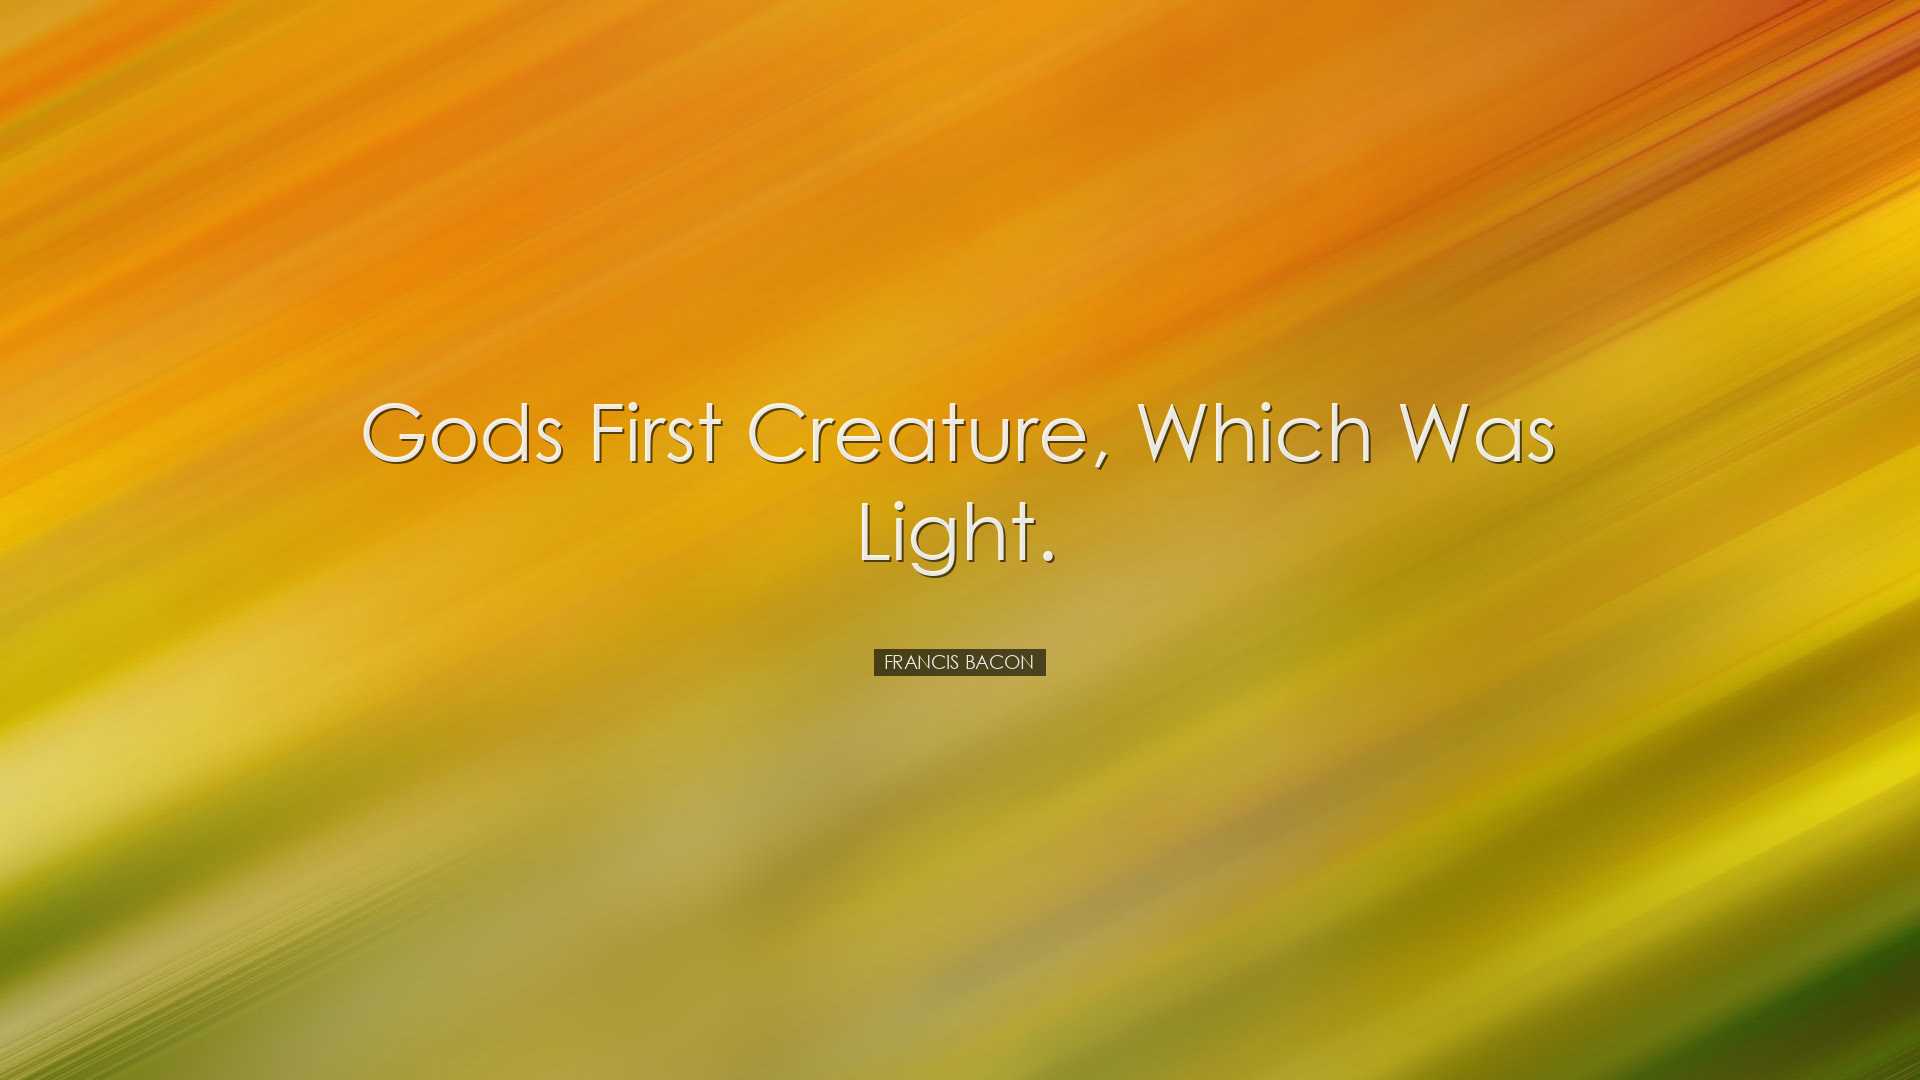 Gods first creature, which was light. - Francis Bacon